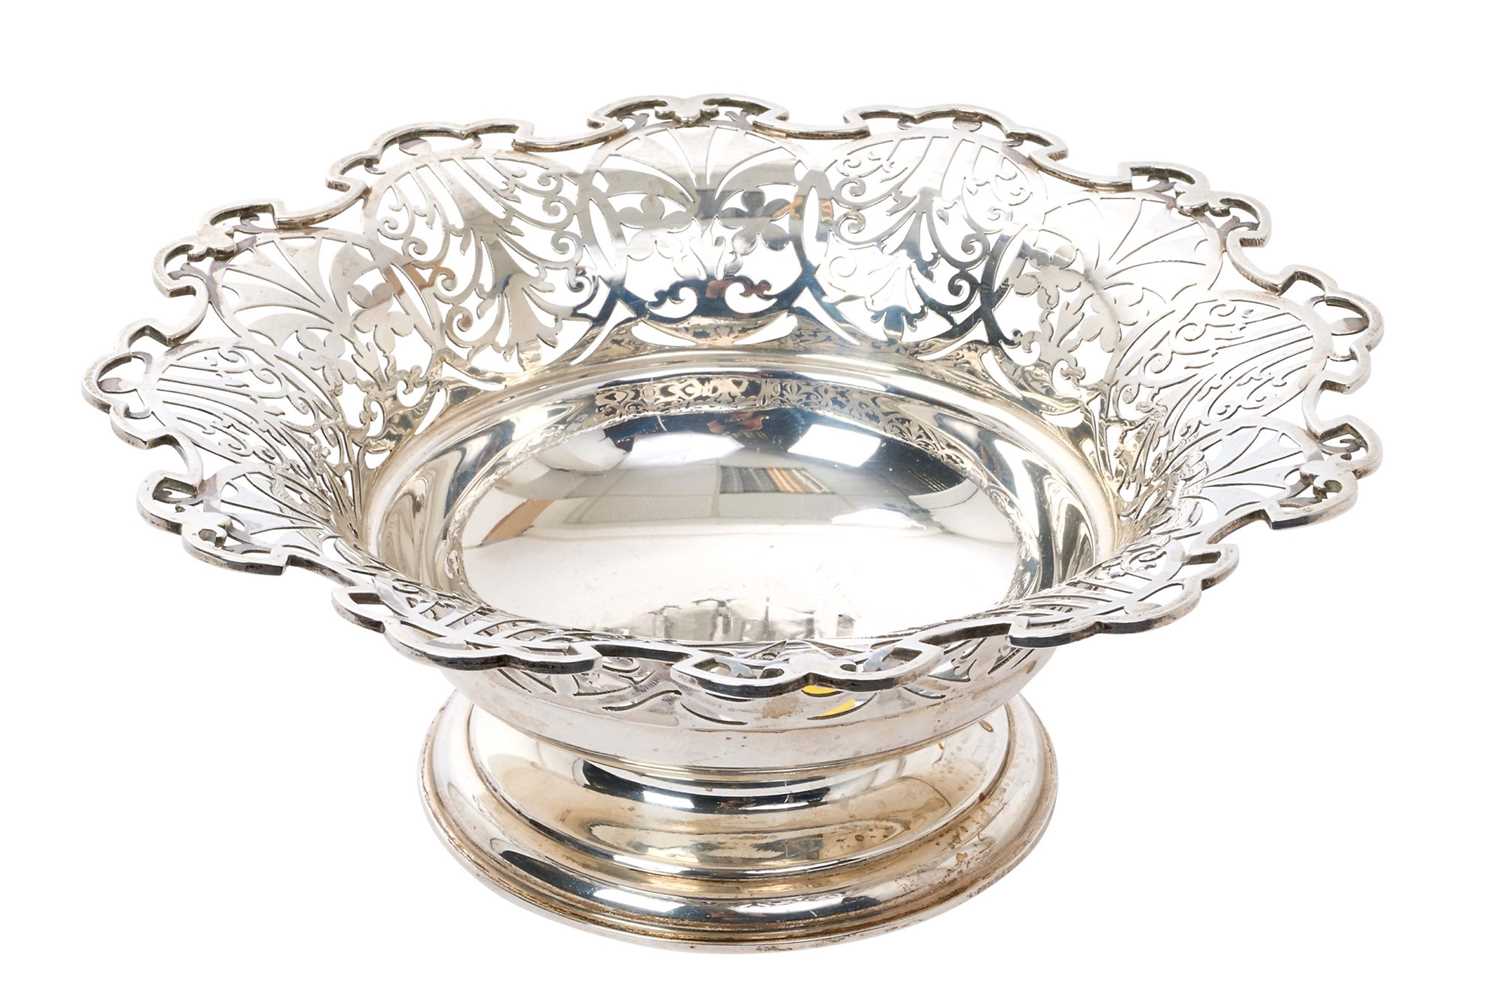 1930s silver bowl, with pierced decoration and flared rim, on a circular stepped base